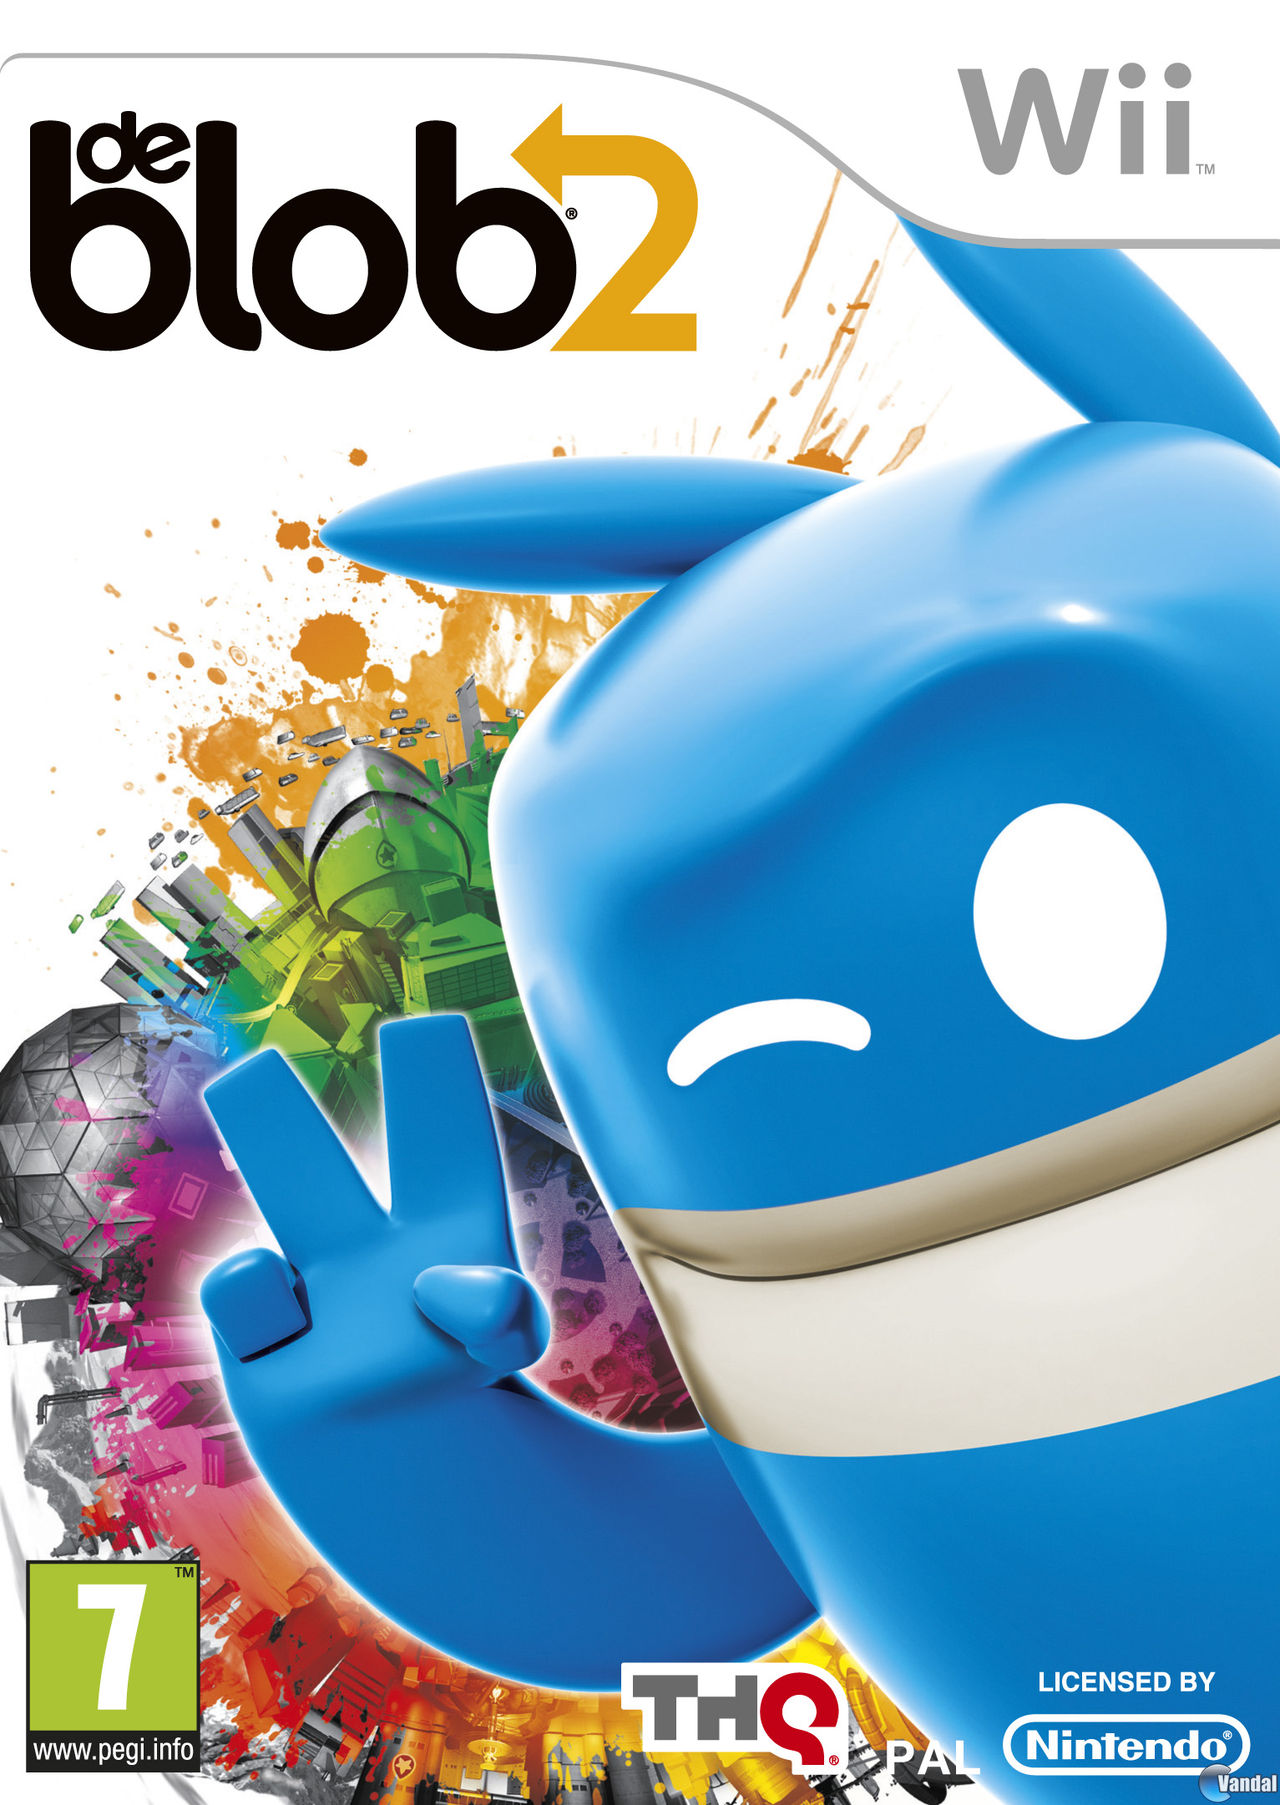 de-blob-2-videojuego-ps3-xbox-360-wii-ps4-nds-pc-xbox-one-y-switch-vandal